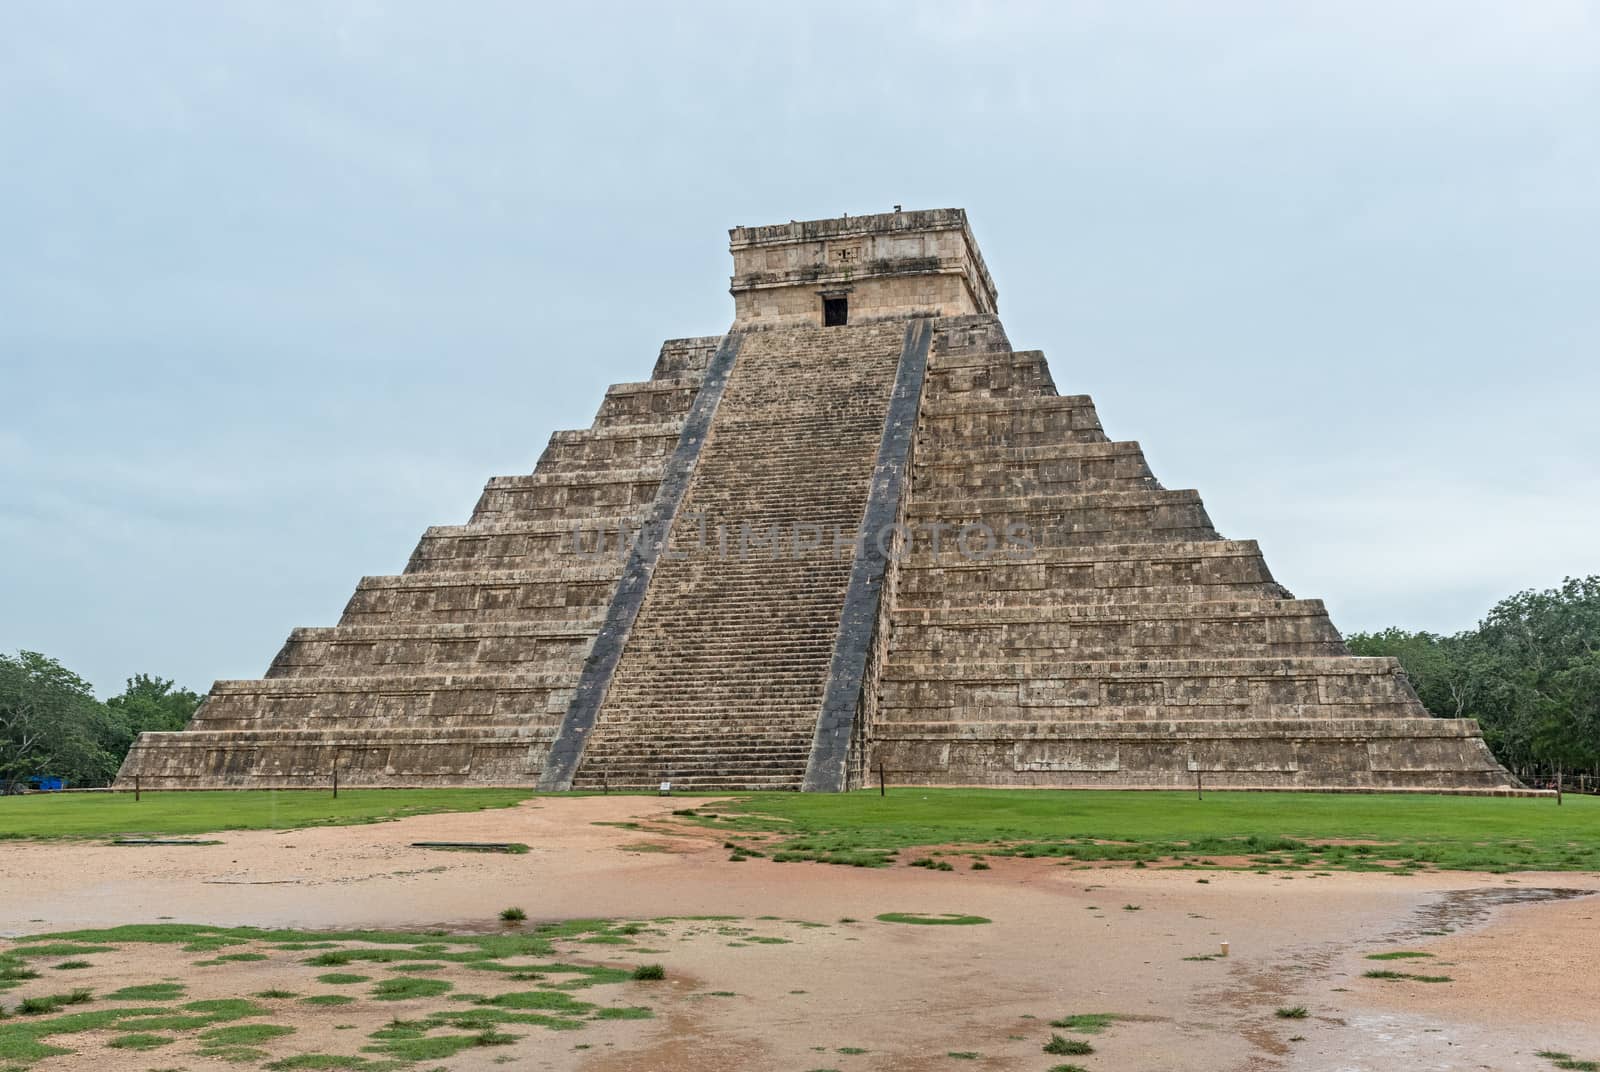 The Kukulkan pyramid in Chichen Itza archeological park, Mexico by Marcus